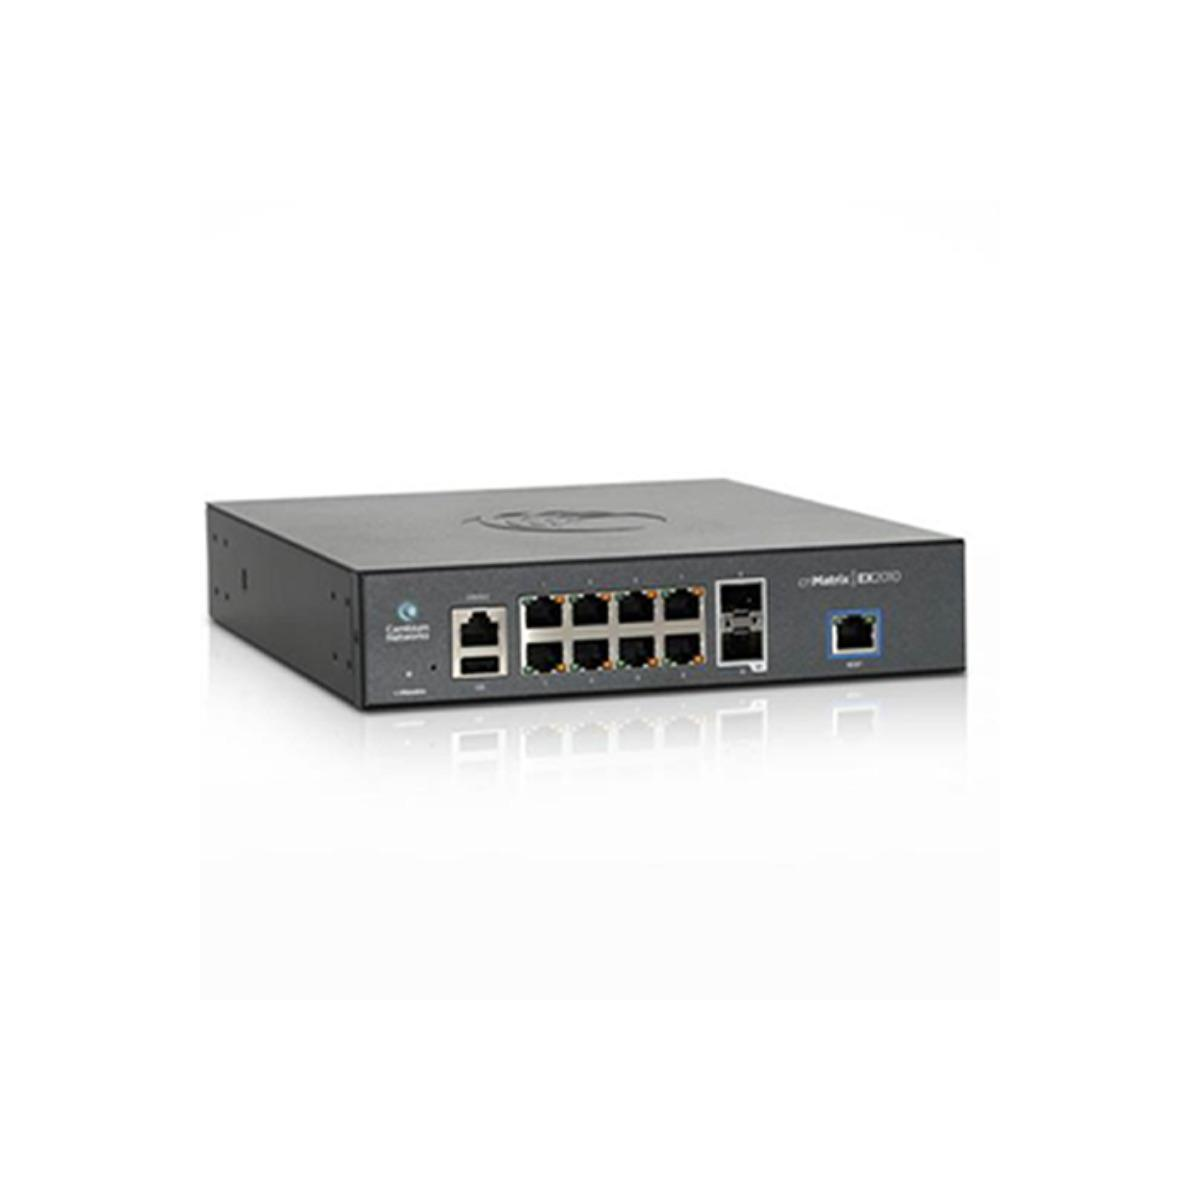 CAMBIUM 8 EOL2 NETWORKS Switch